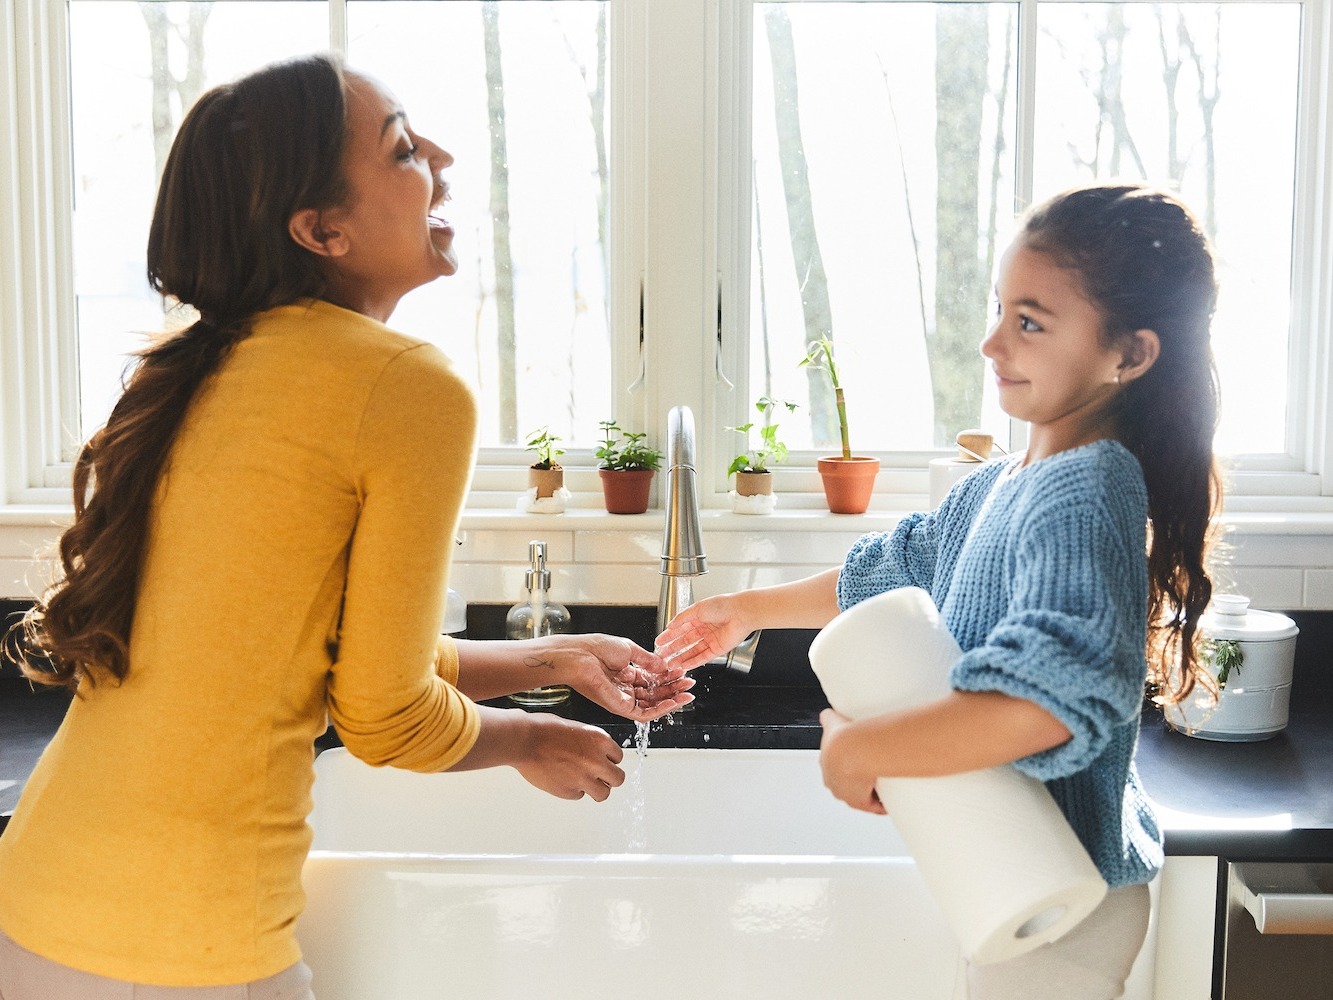 mom and daughter washing their hands at kitchen sink while daughter holds roll of paper towels